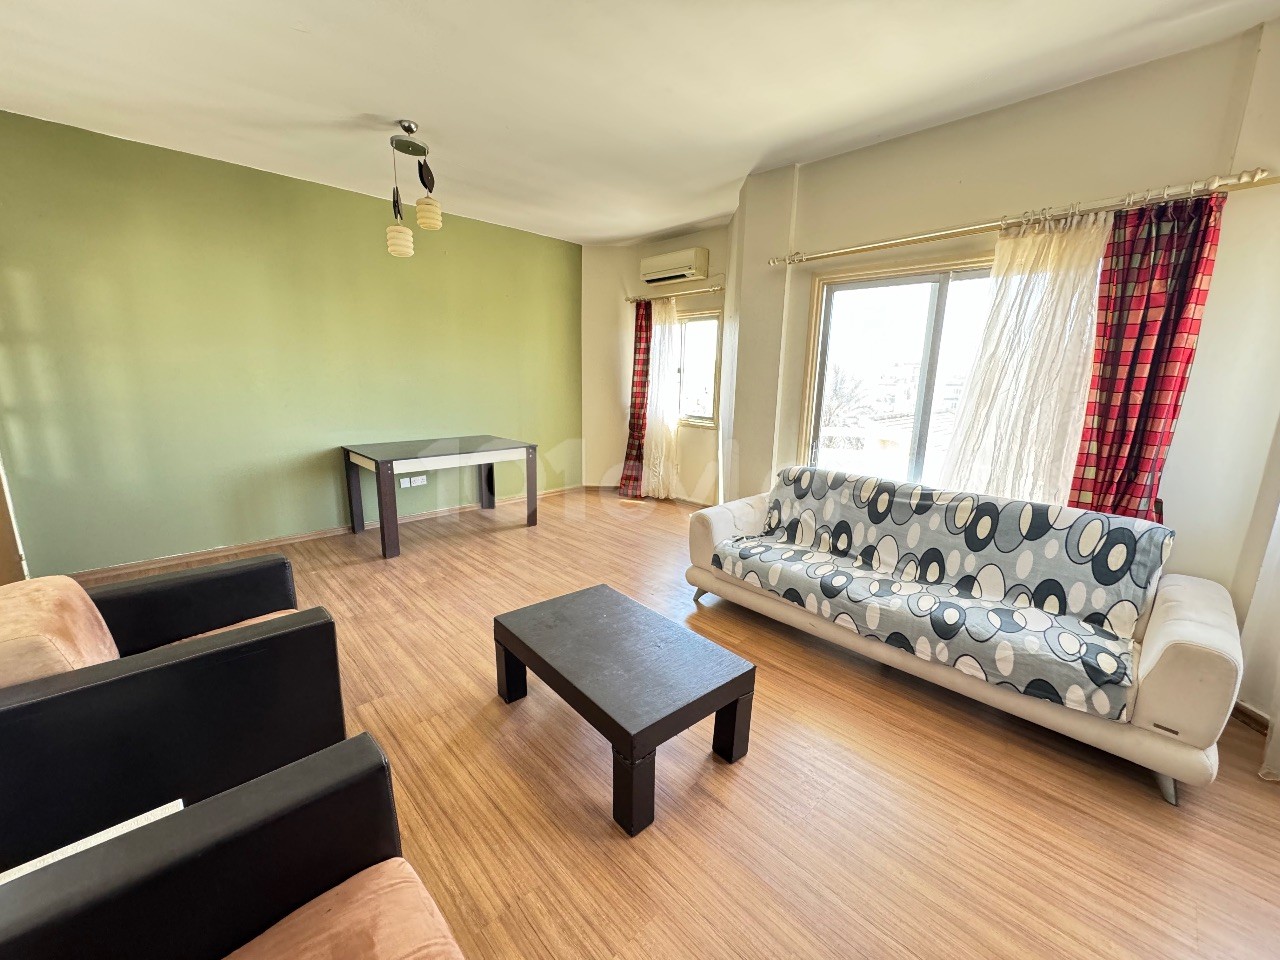 Centrally Located 3-Bedroom Apartment FOR RENT in the Marmara Region, Walking Distance to the Bus Stop!